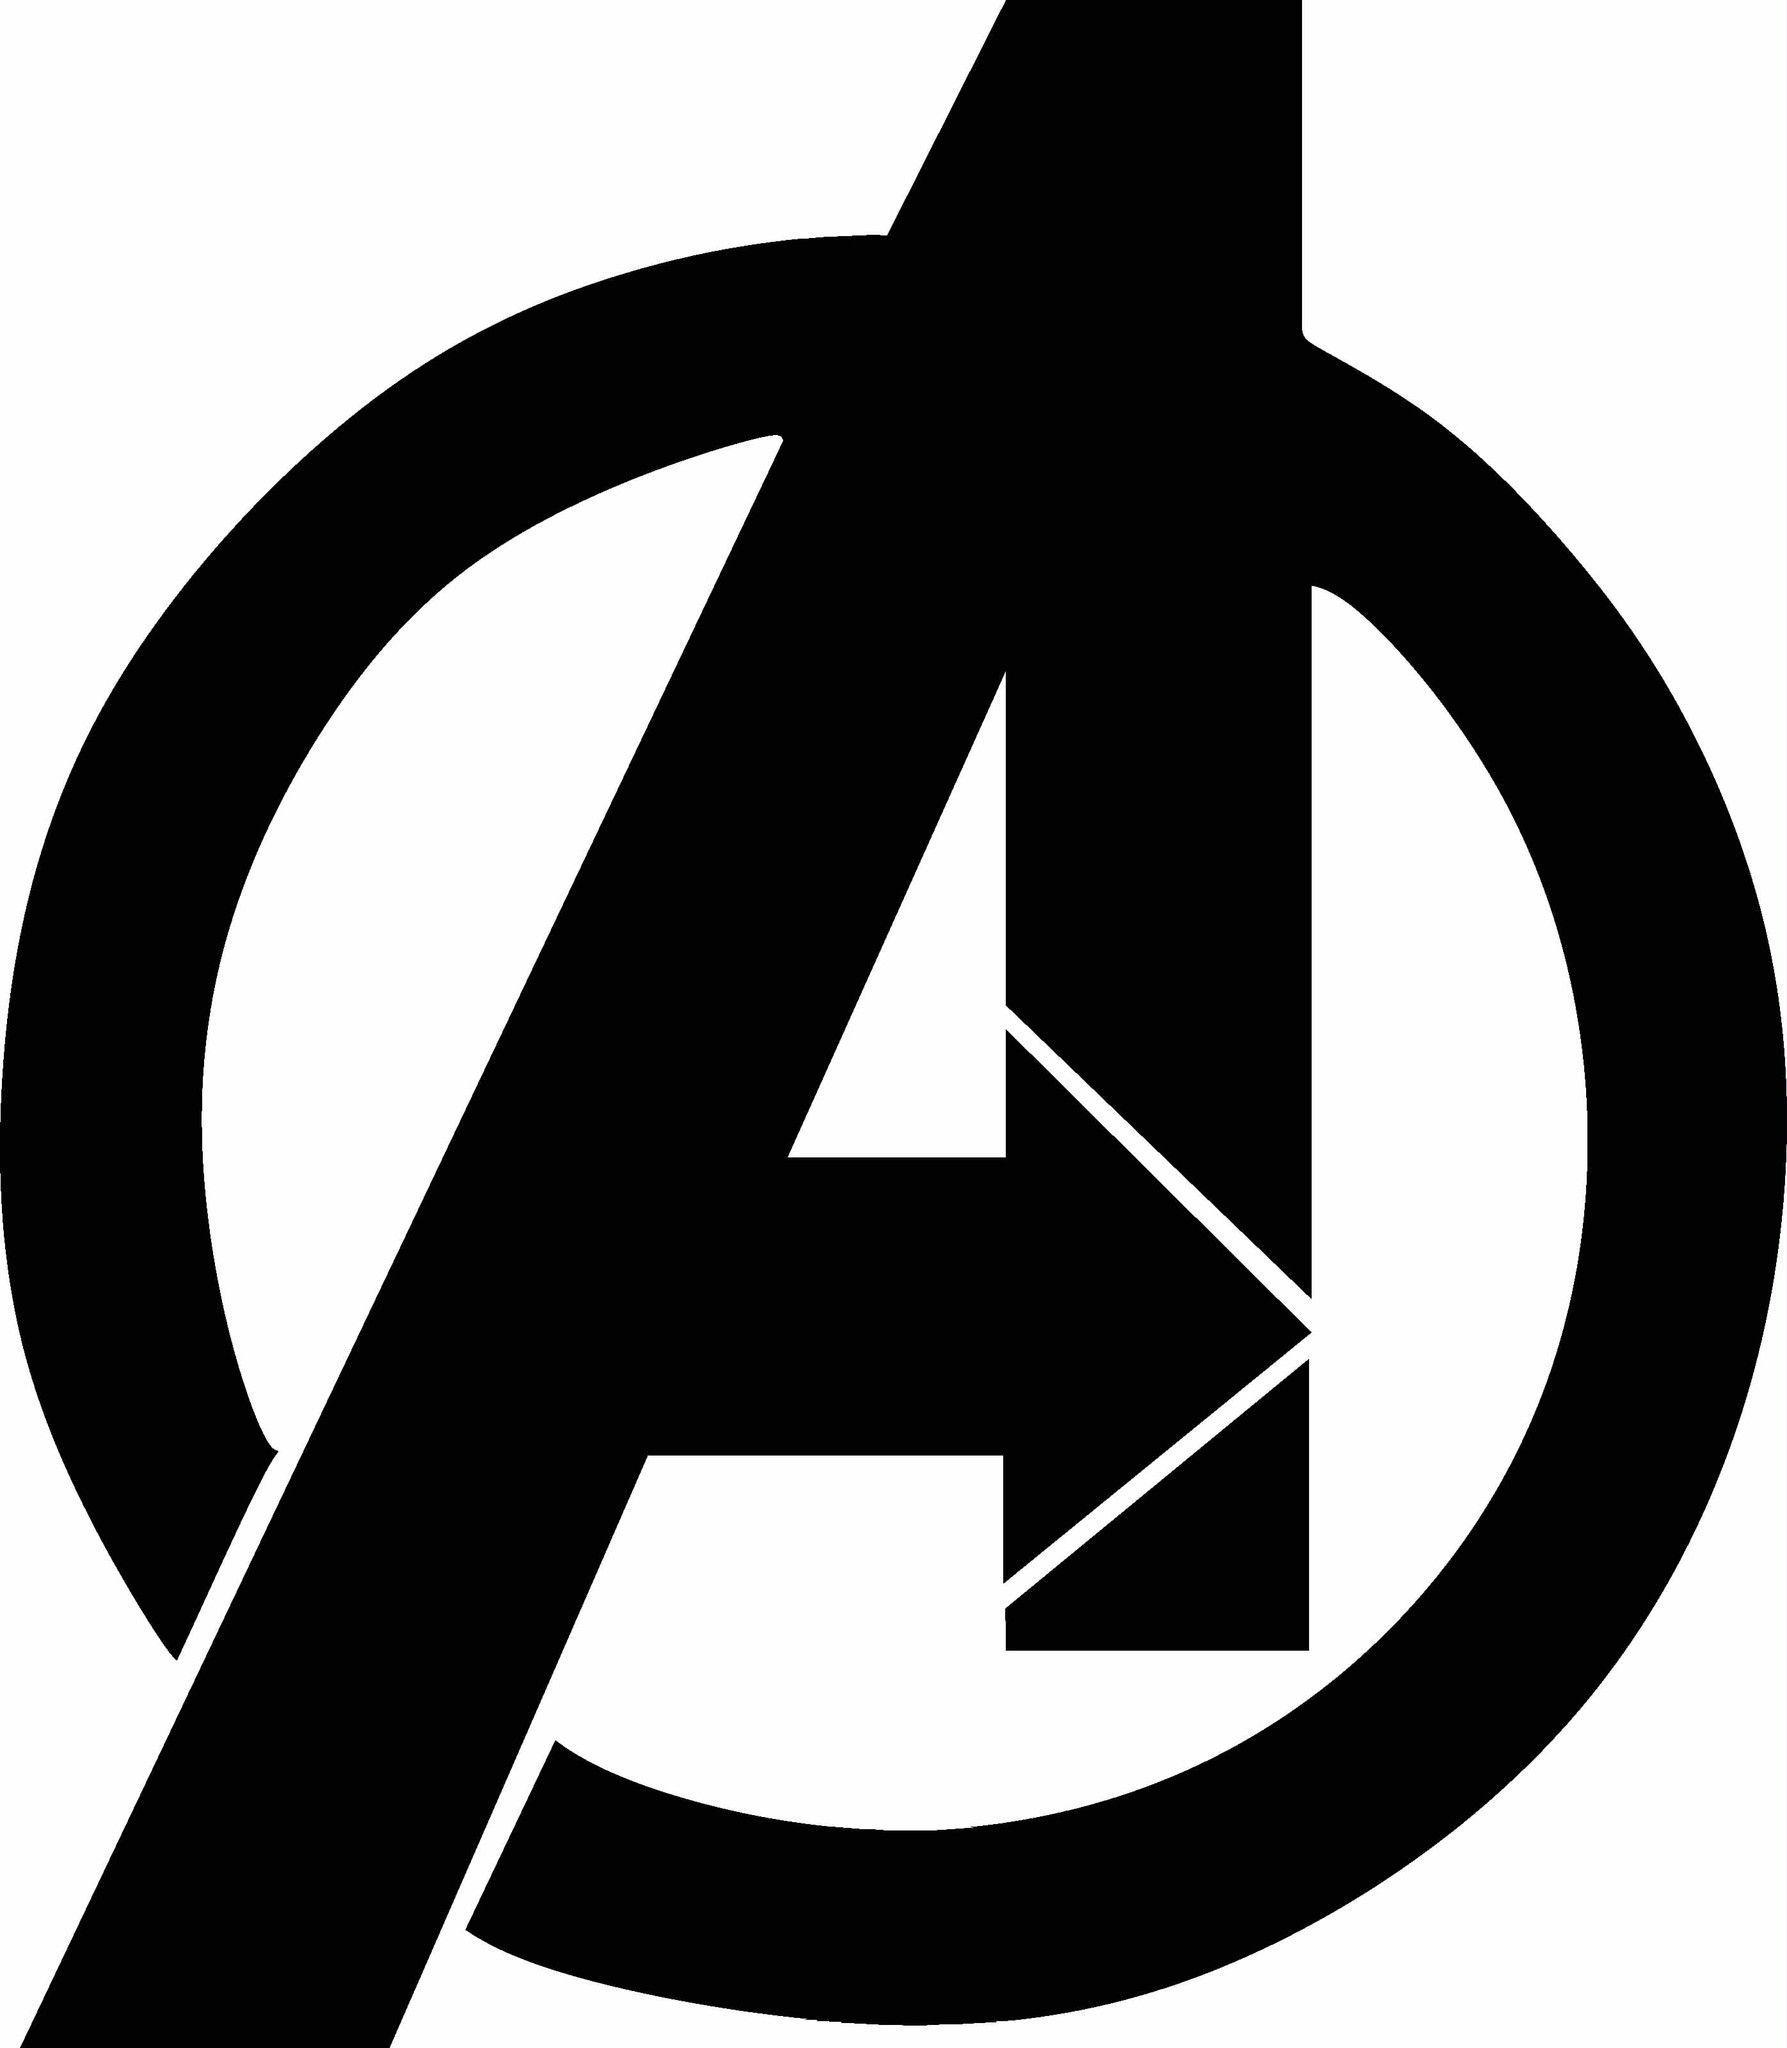 The Avengers Black and White Logo - Avengers Logo Vinyl Decal Graphic - Choose your Color and Size ...